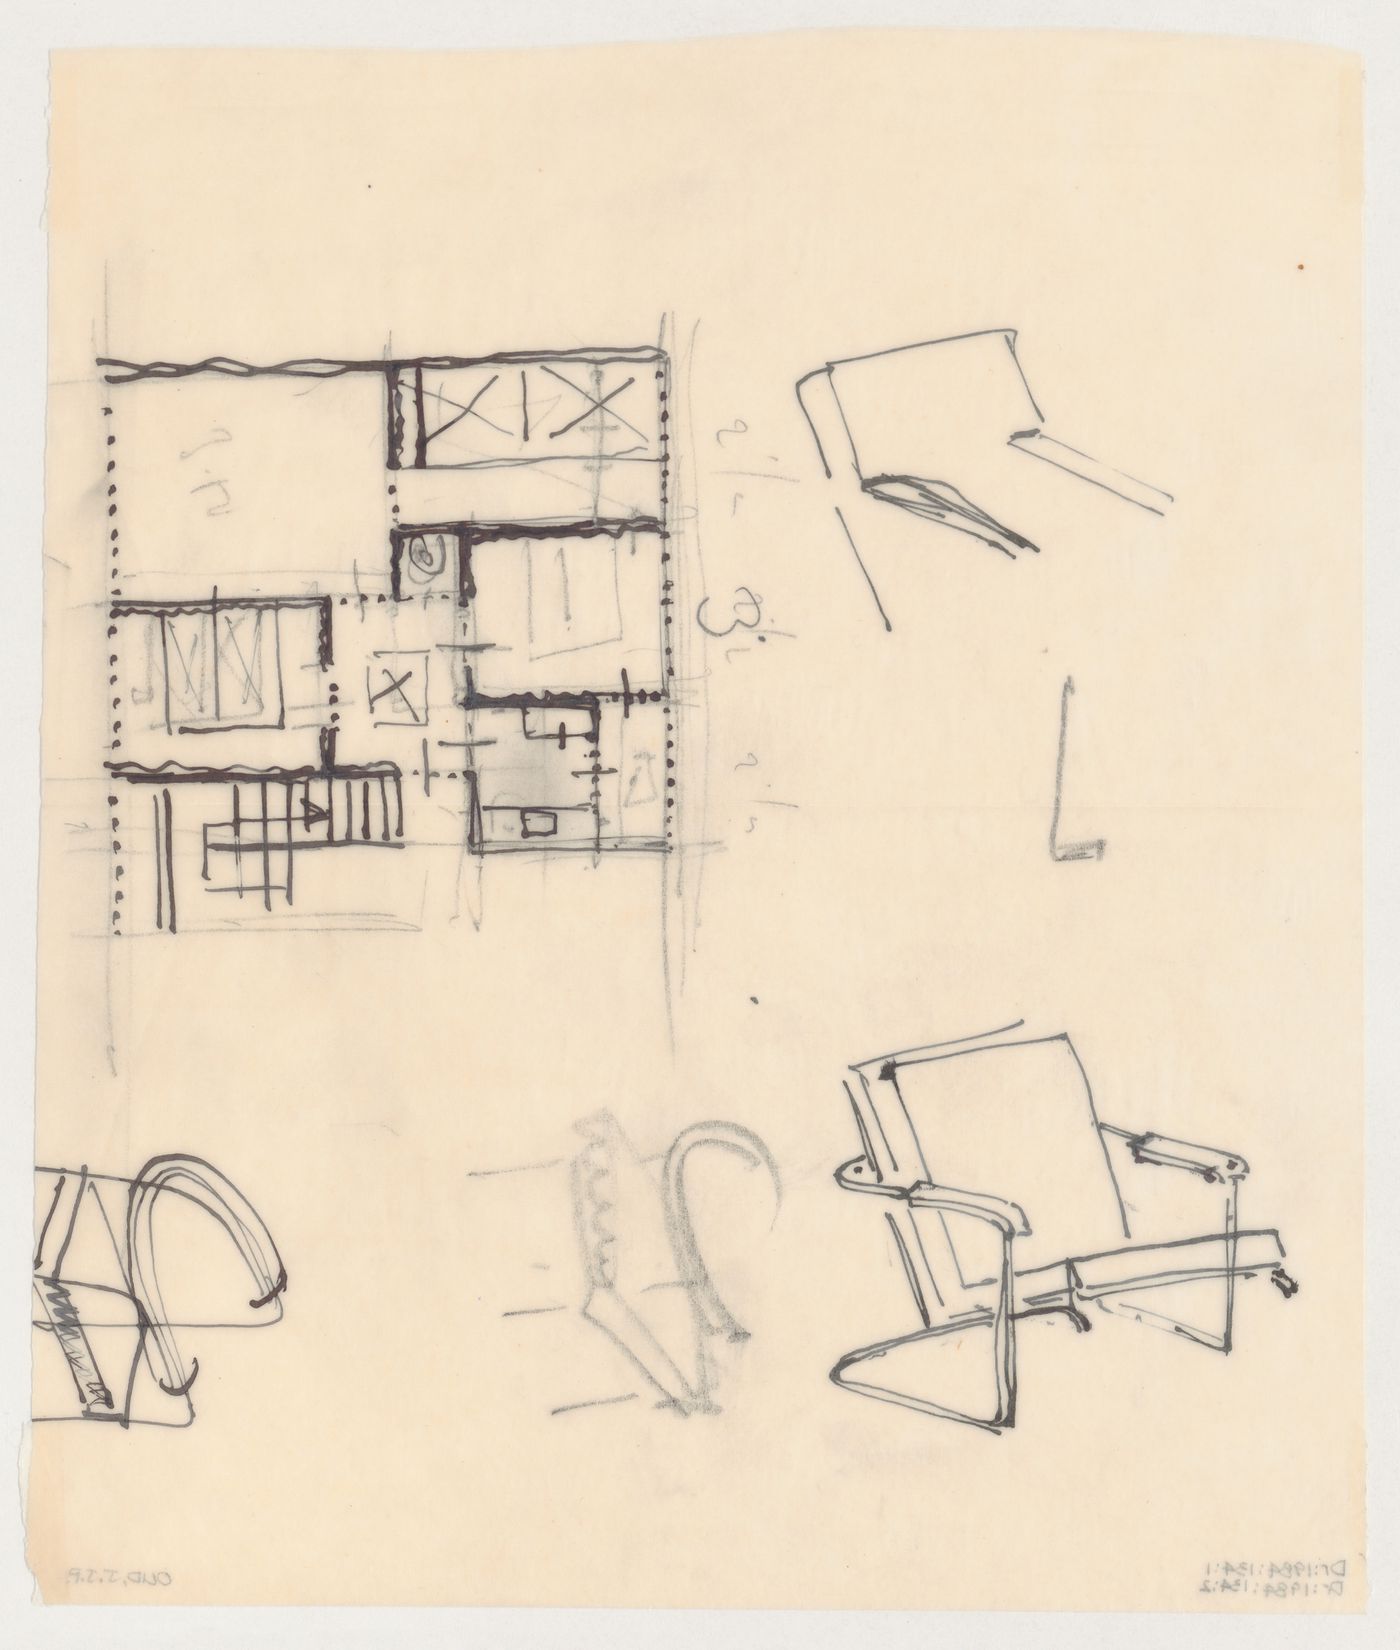 First floor sketch plan for a house [?] and sketch perspectives for a chair, possibly for Metz & Co., Amsterdam, Netherlands; verso: Sketch perspectives for a chair, possibly for Metz & Co., Amsterdam, Netherlands